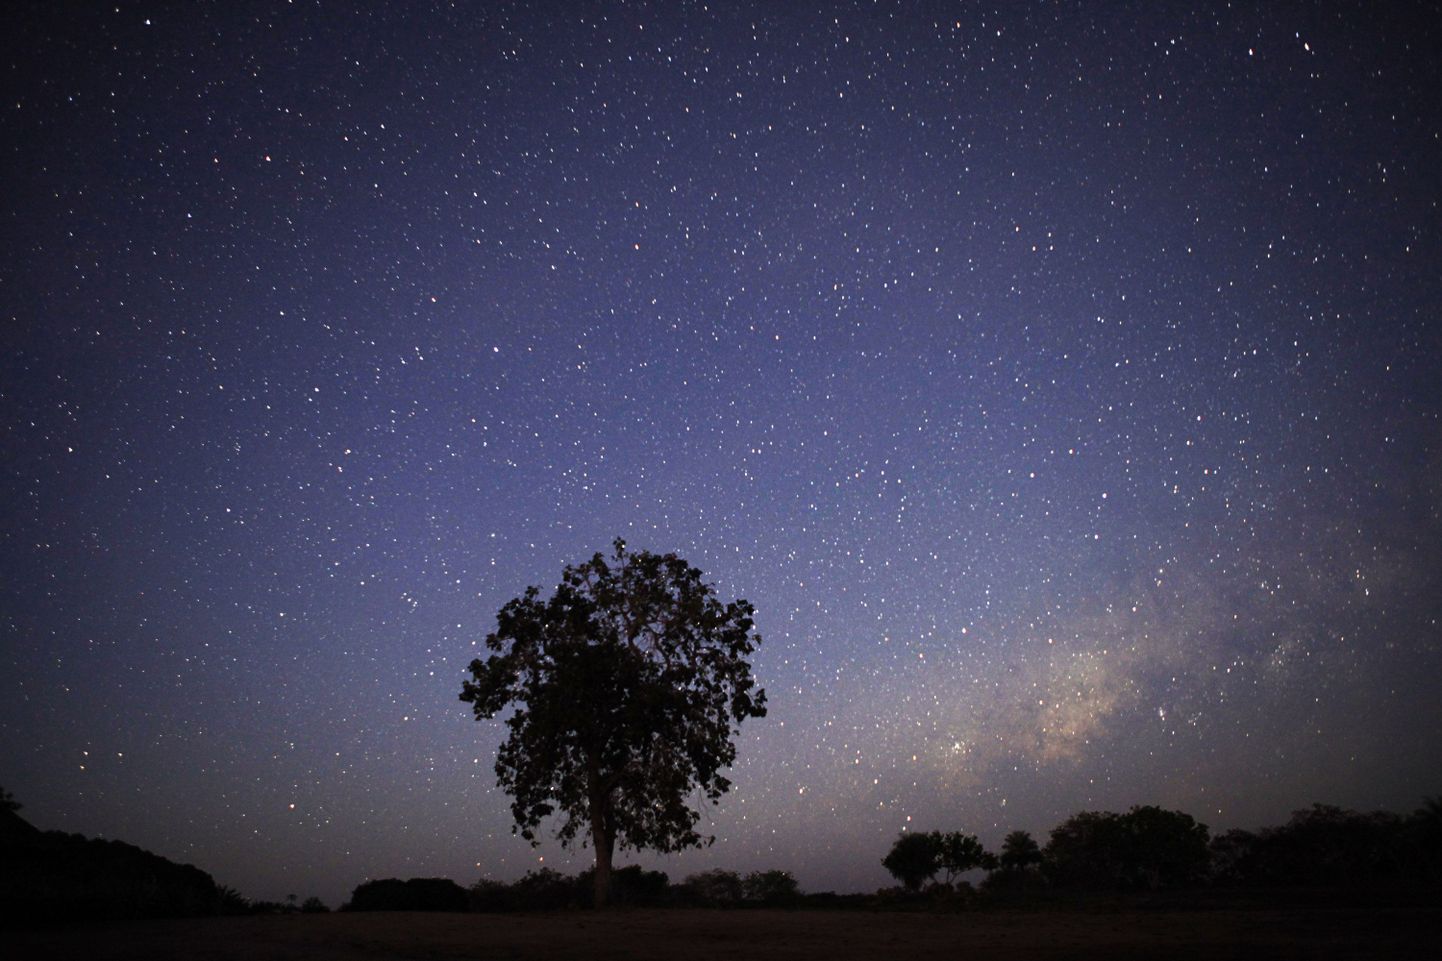 A clear, star-filled sky over the Xingu Park near Mato Grosso, Brazil, in June, 2009. The Kamayura tribe inhabit the Xingu National Park in Mato Grosso. For centuries, fish from jungle lakes and rivers have been a staple of the Kamayura diet, its primary source of protein. But fish smells are not really a problem for the warriors anymore. Deforestation and, some scientists contend, global climate change, is making the Amazon region drier and hotter, decimating fish stocks and imperiling the very existence of the Kamayura. Like other small indigenous cultures around the world with little money or capacity to move, they are struggling to adapt to the changes. (Damon Winter/The New York Times)